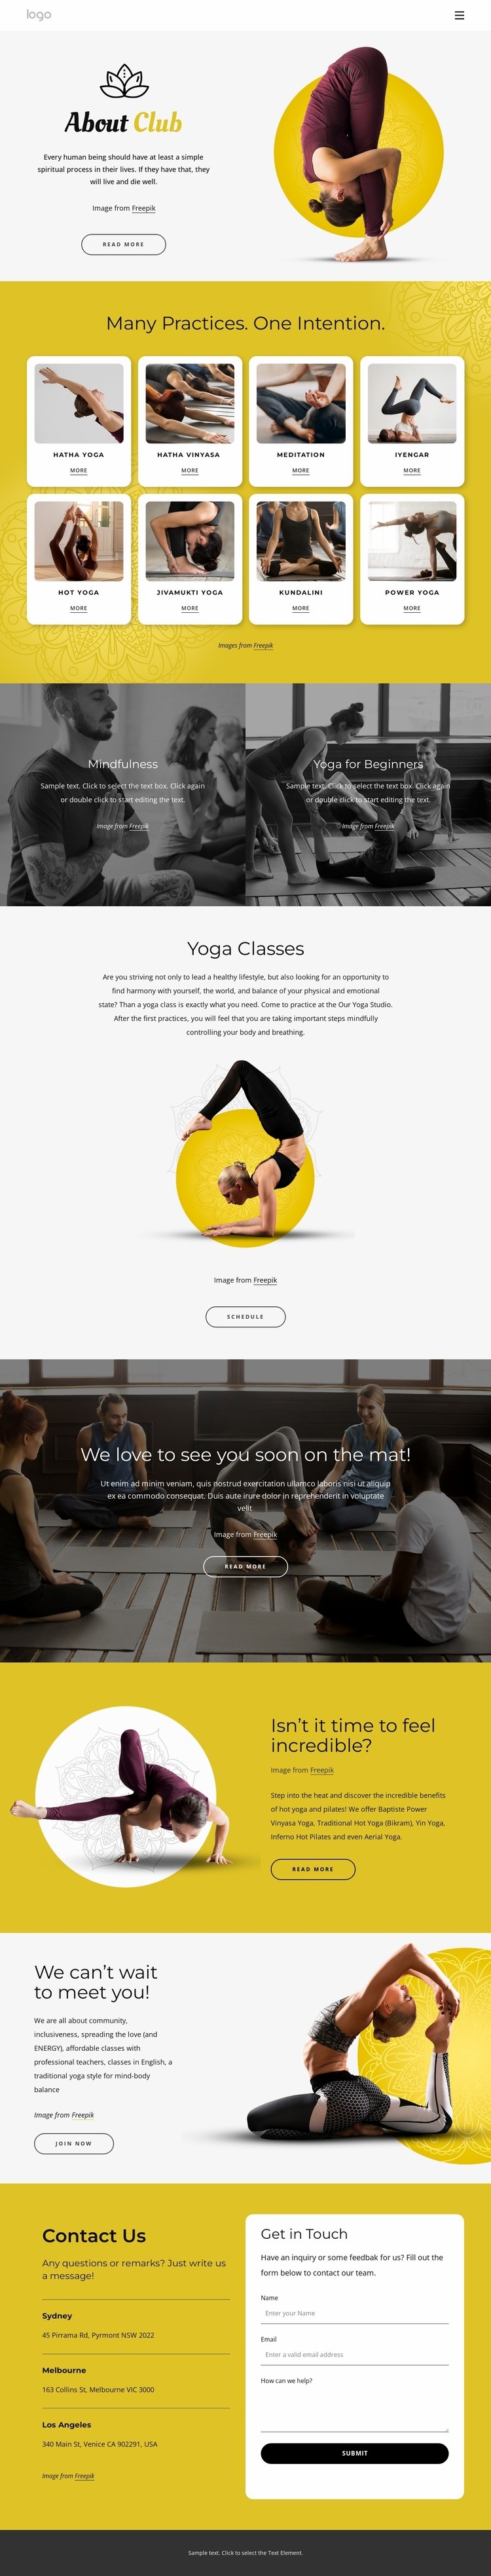 Physical, ethical and spiritual practice Wix Template Alternative